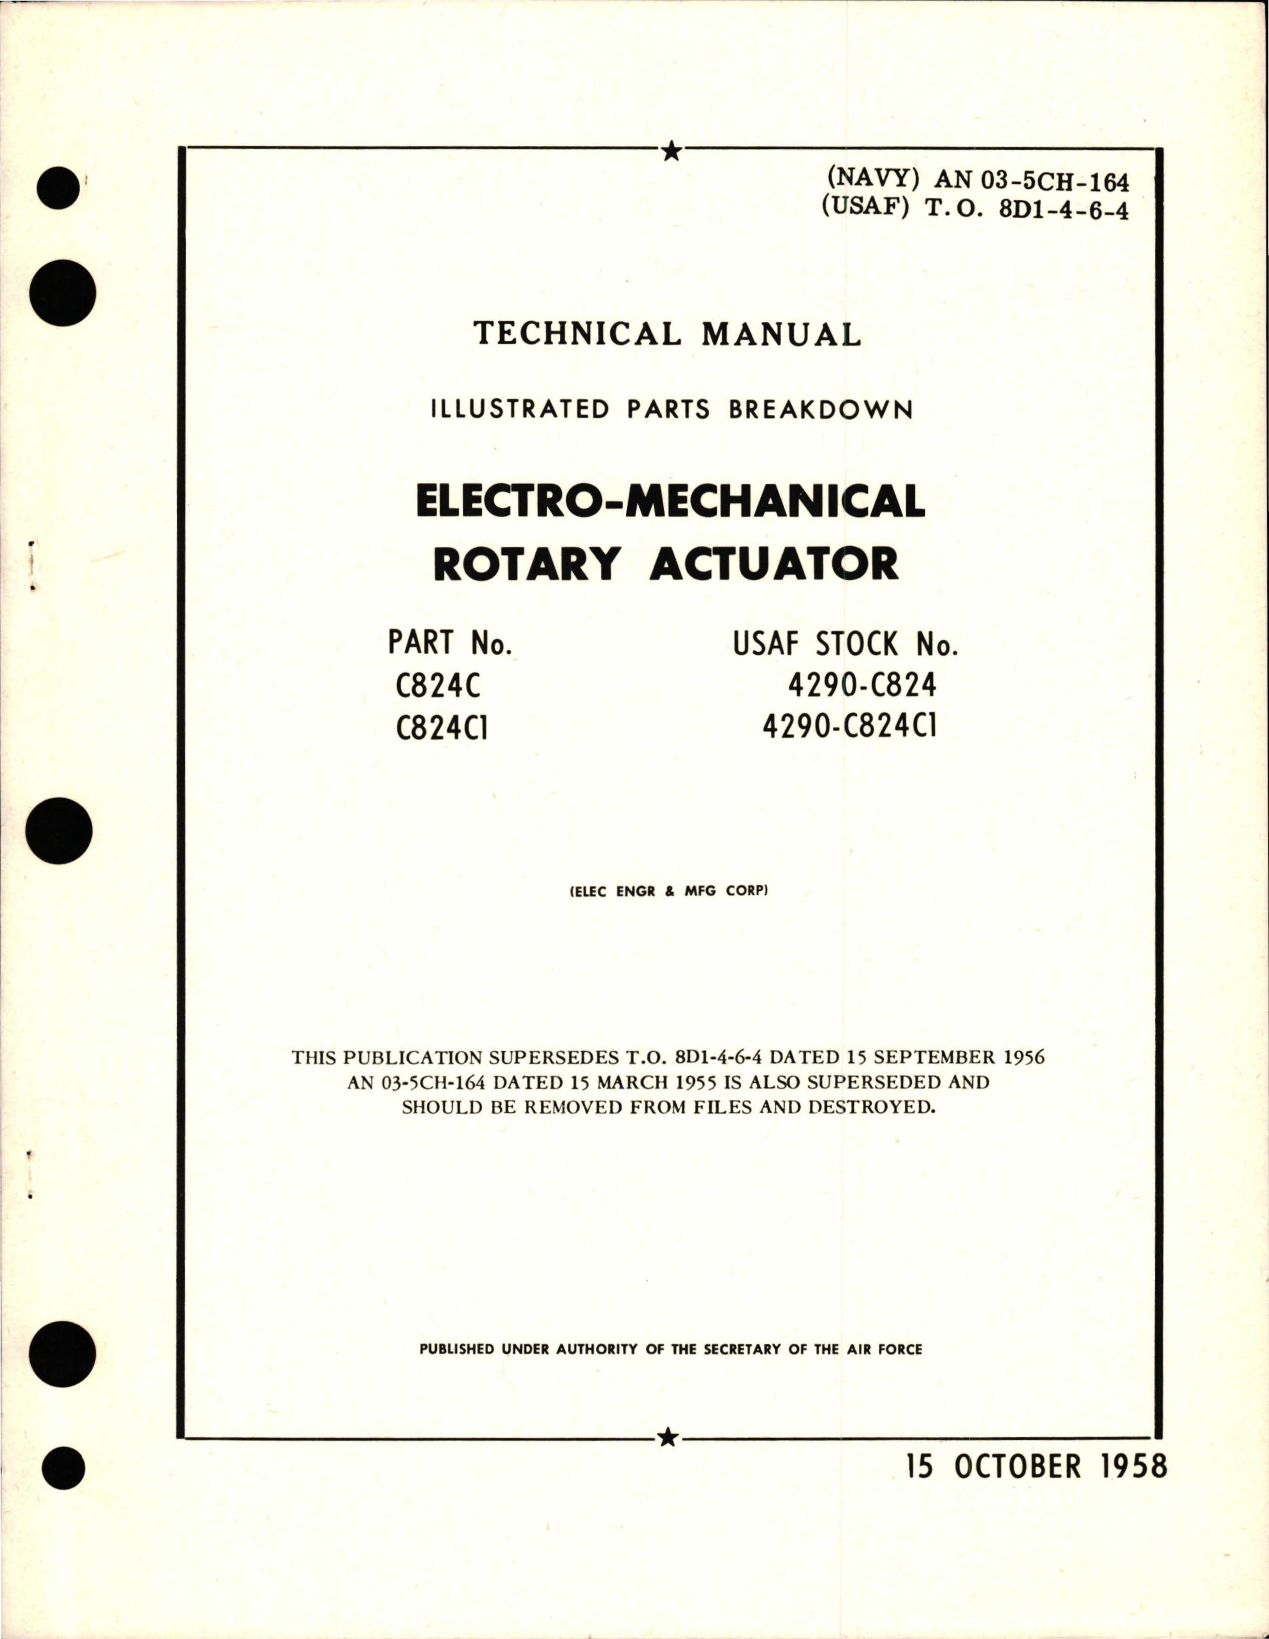 Sample page 1 from AirCorps Library document: Illustrated Parts Breakdown for Electro-Mechanical Rotary Actuator - Parts C824C and C824C1 